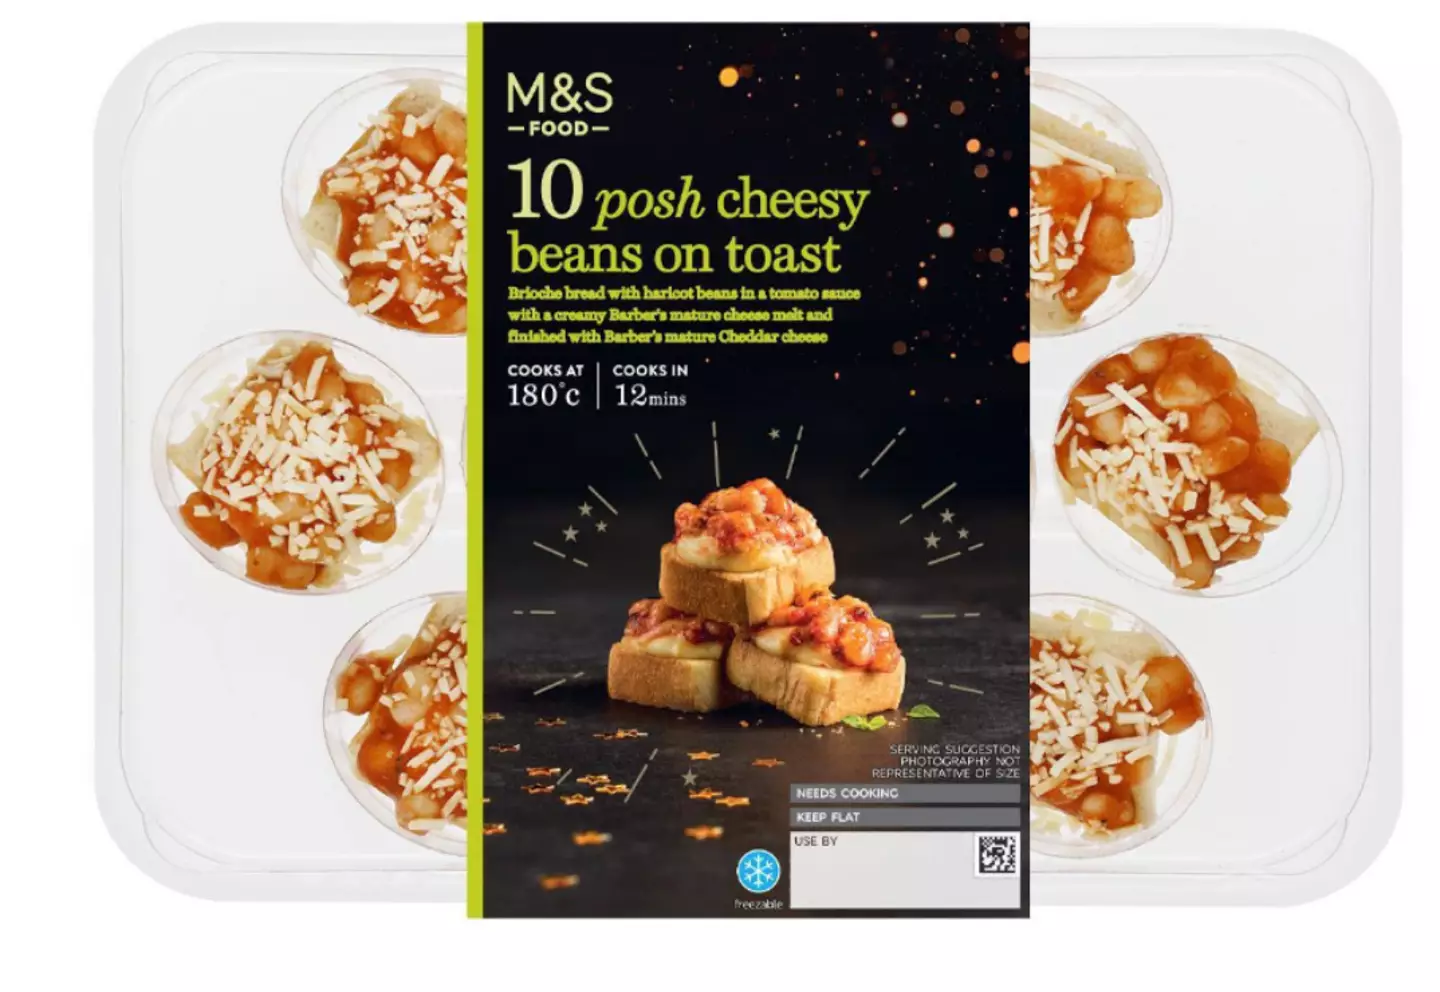 The posh cheesy beans on toast has been criticised (